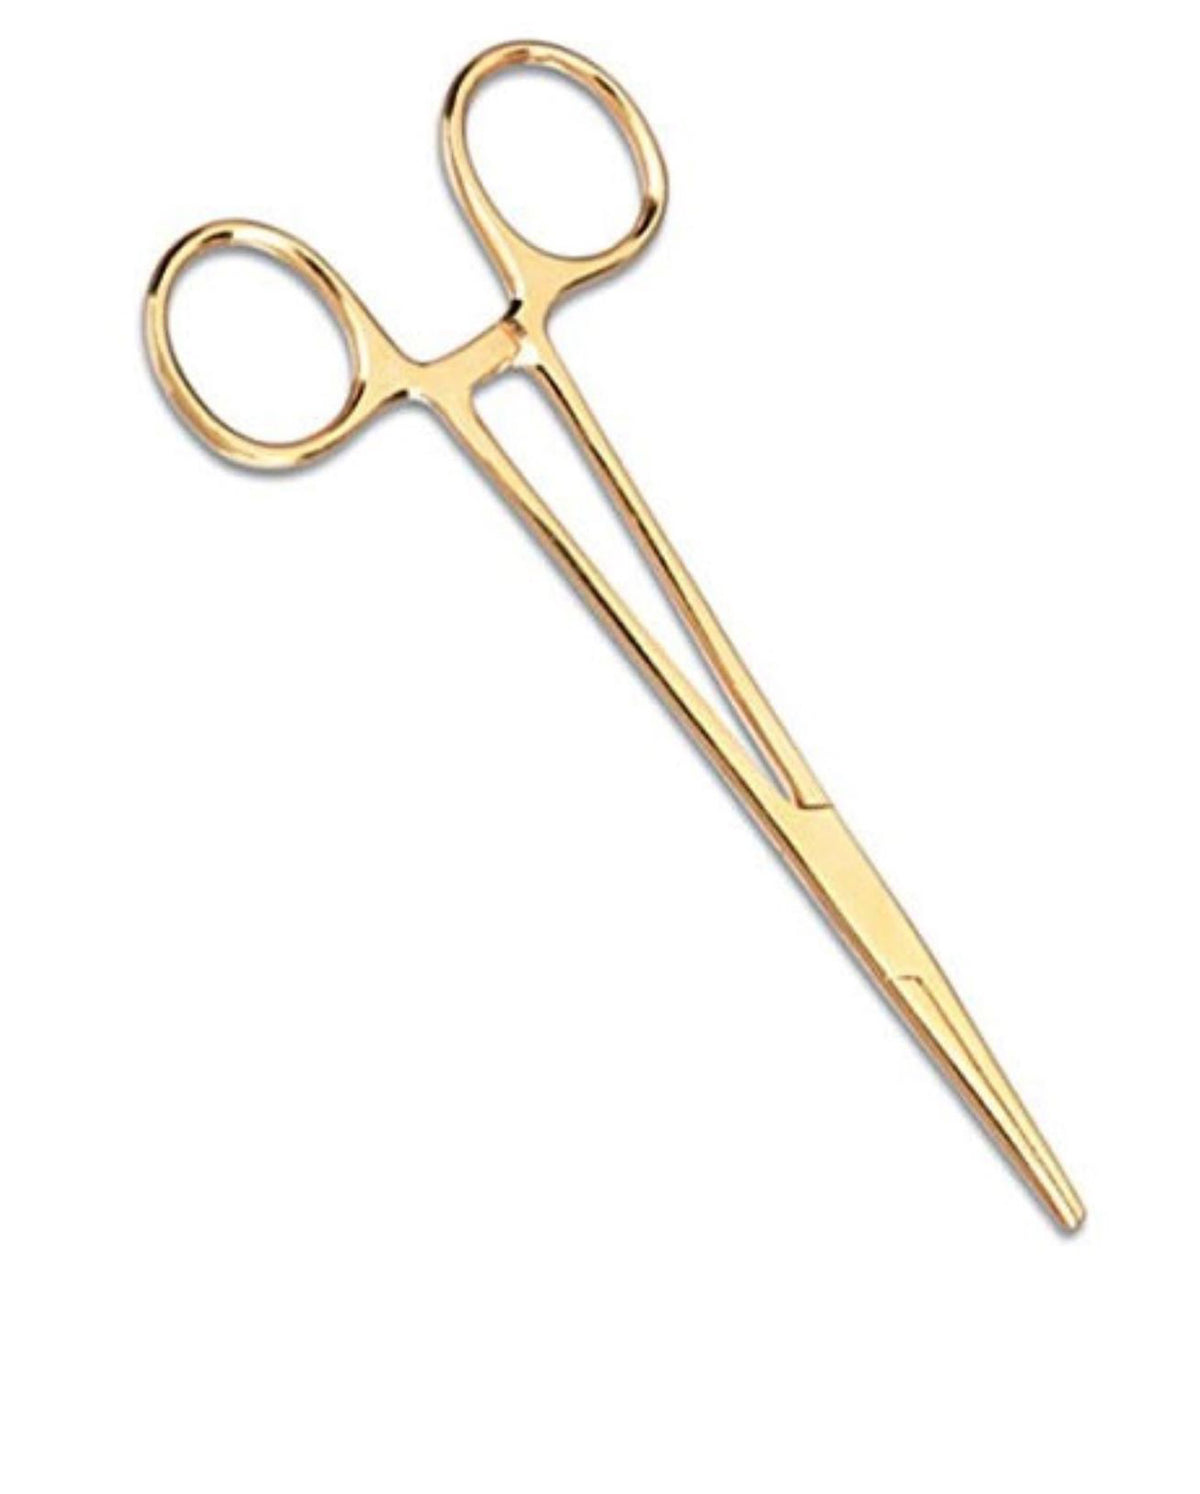 Rogue Paq Hemostat Packing Tool/Joint Clip